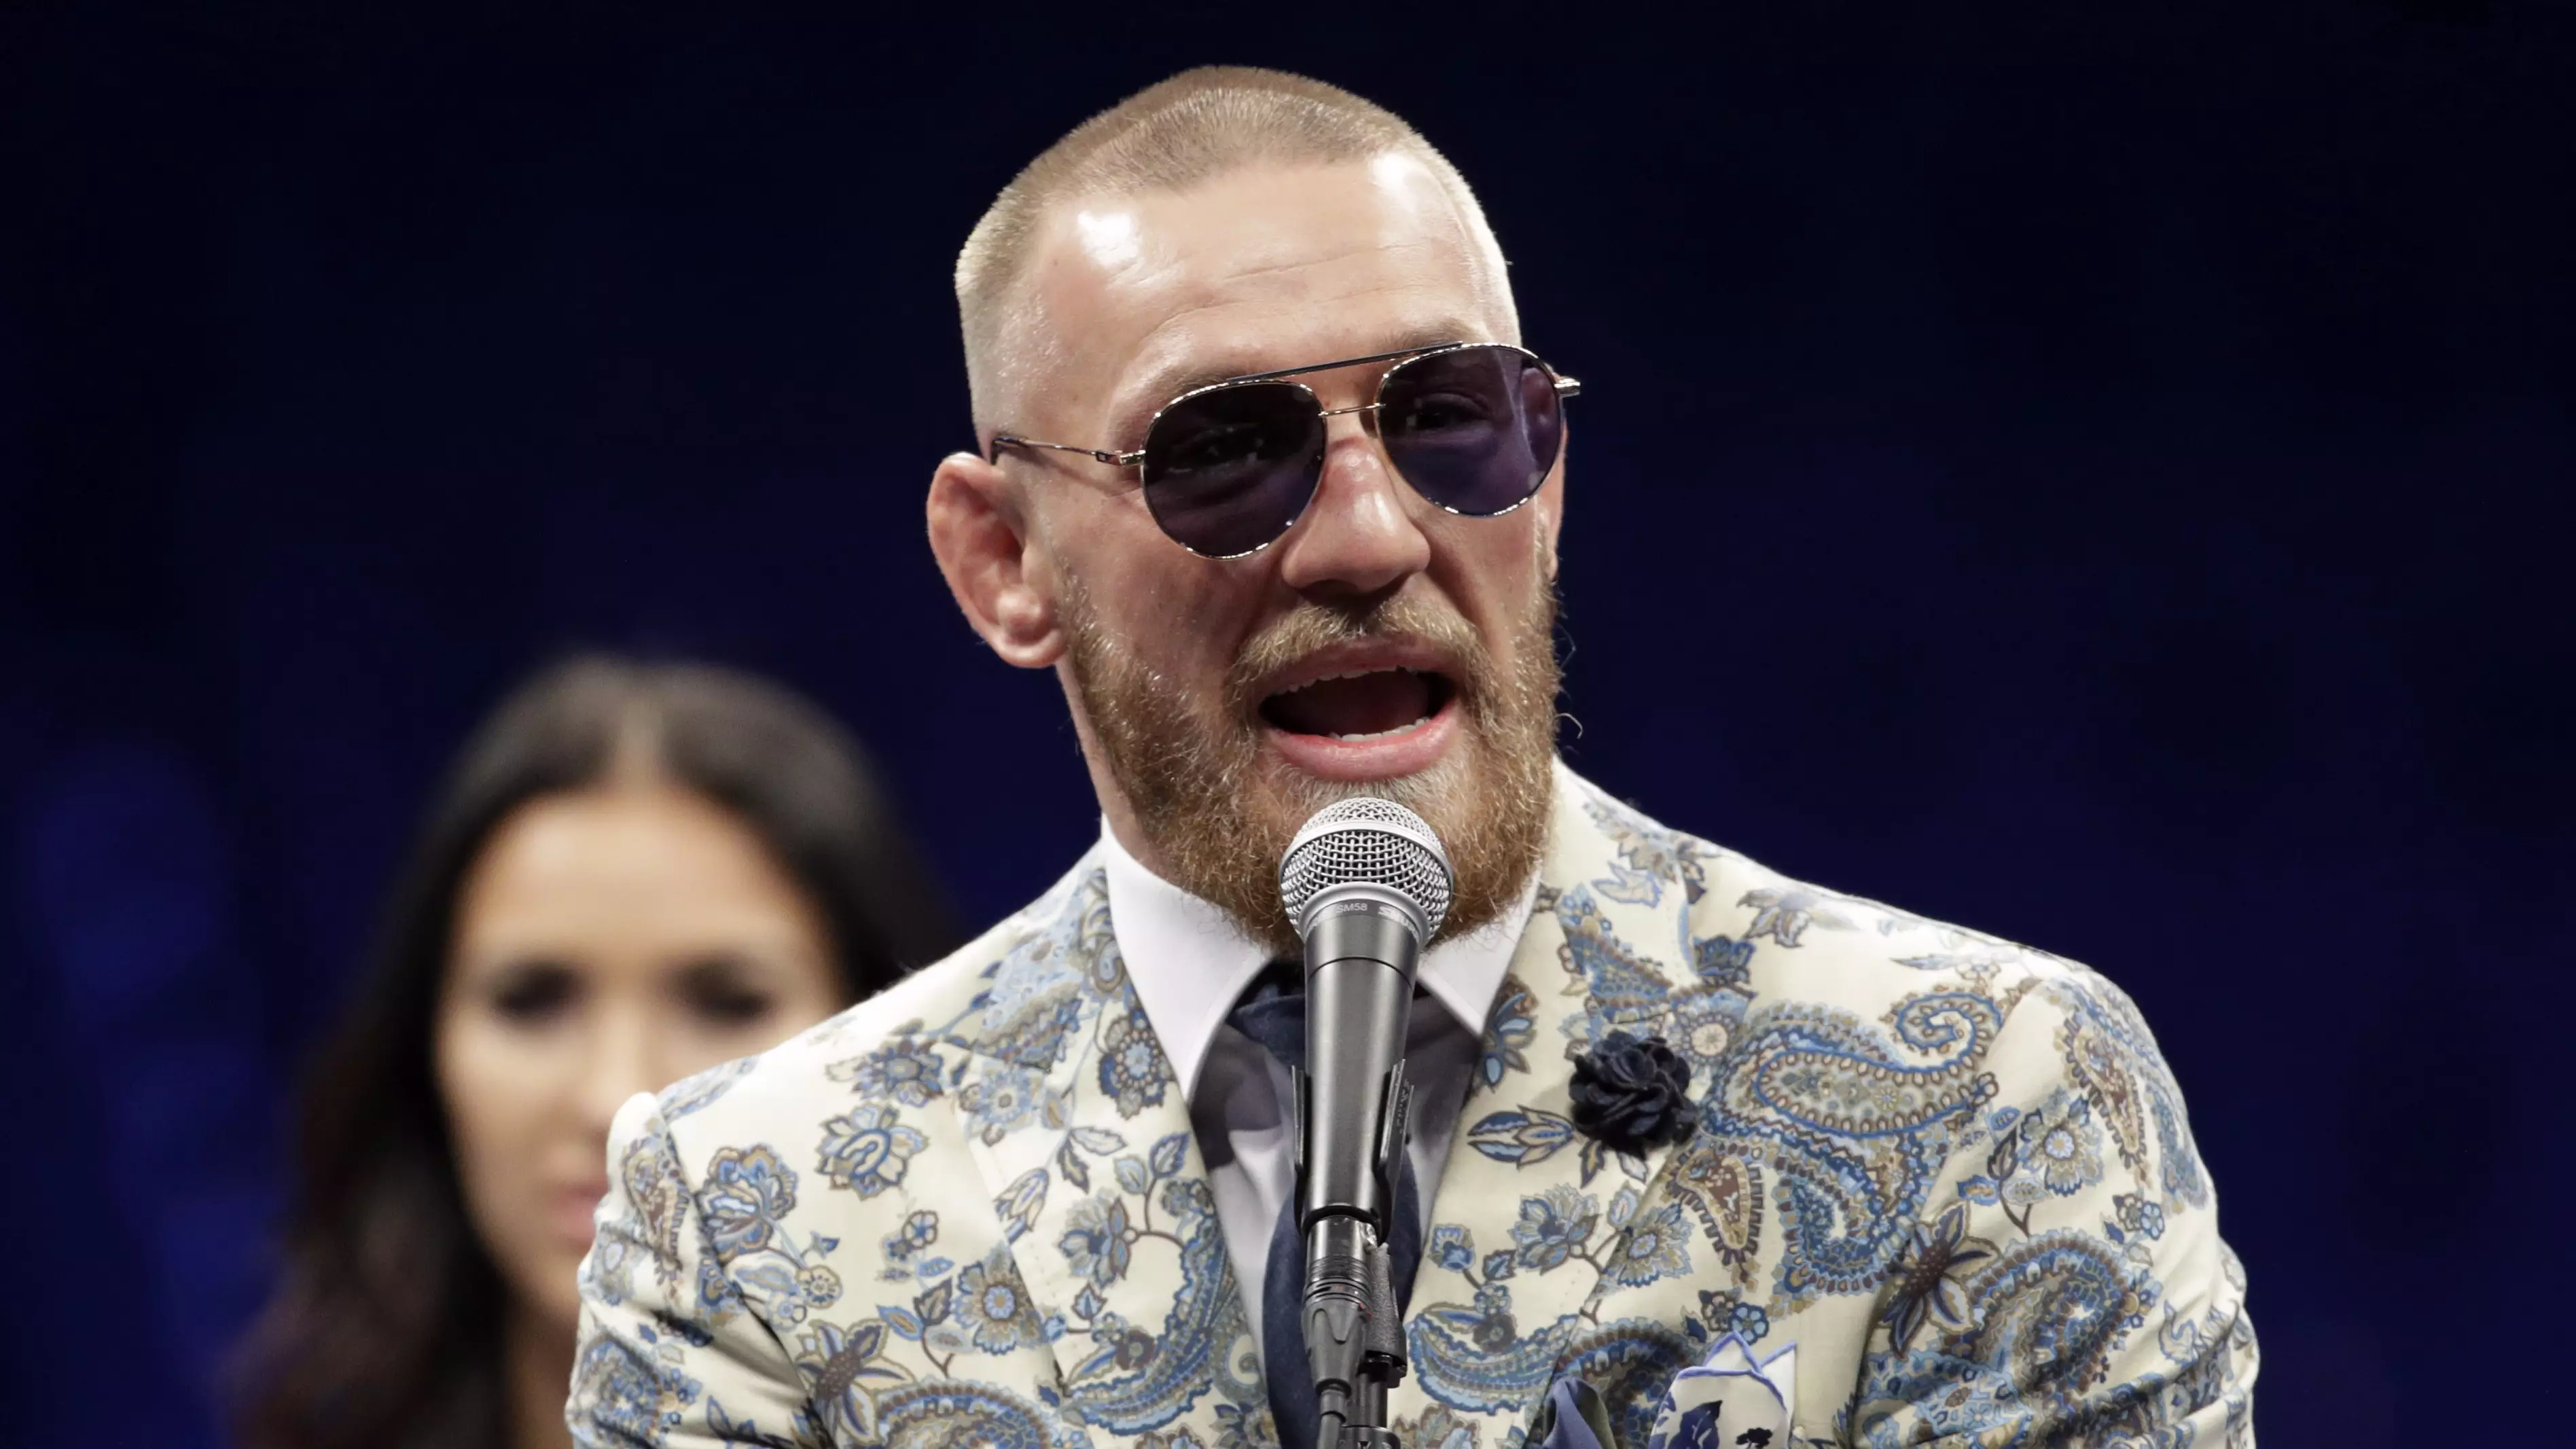 Check Out Conor McGregor's Classy First Insta Post Following Mayweather Defeat 